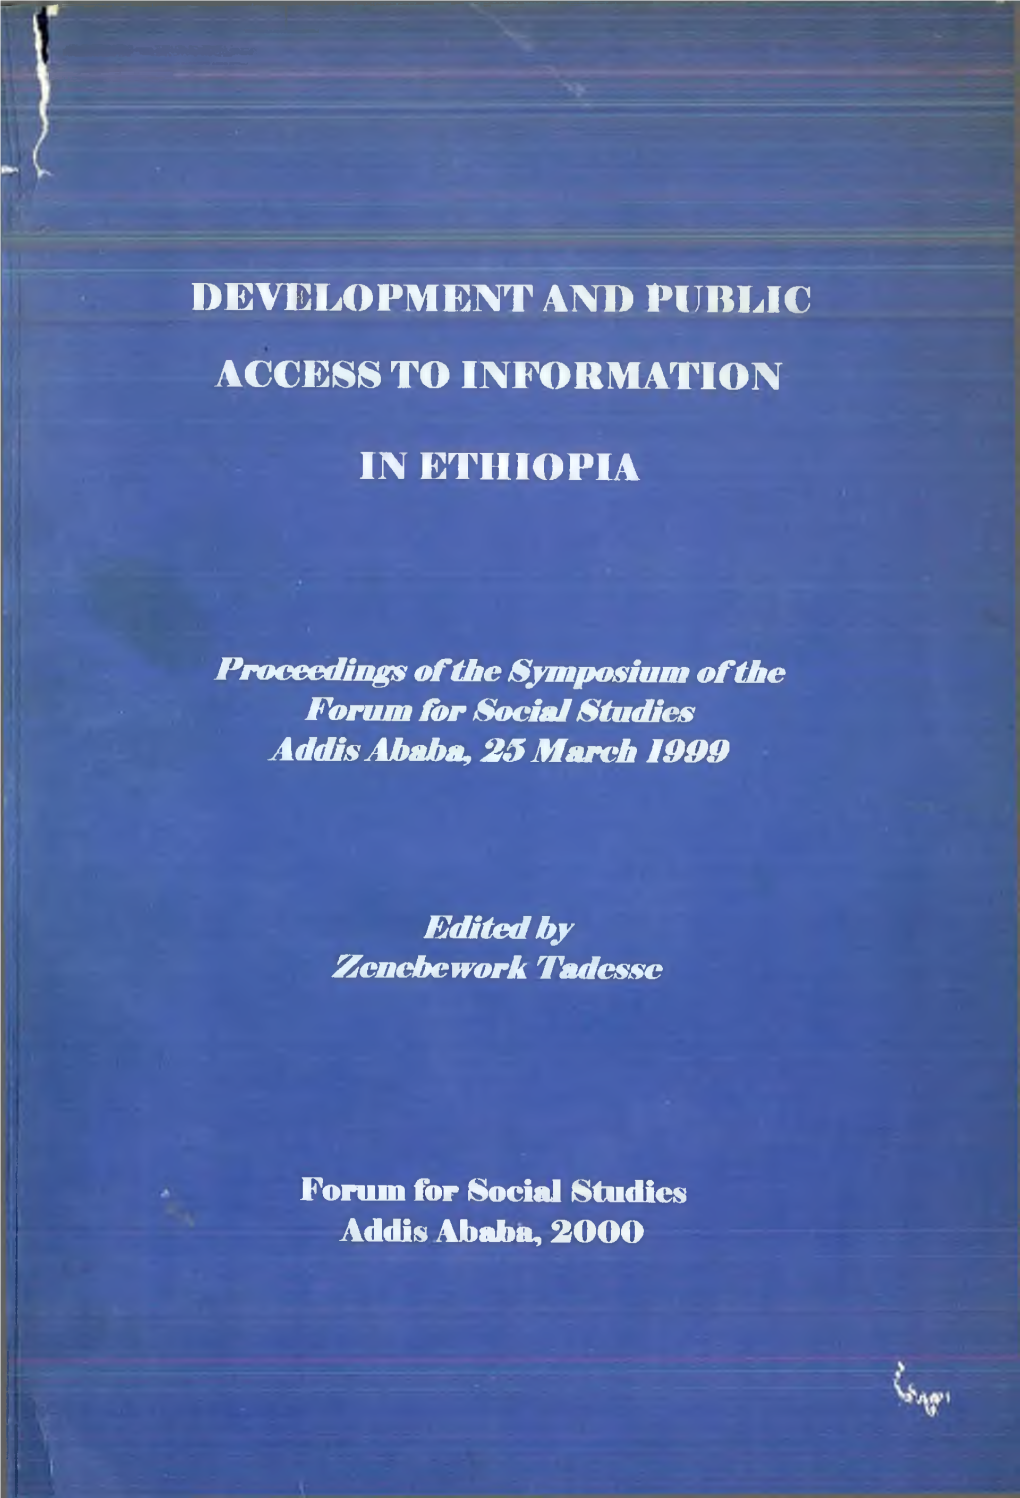 DEVELOPMENT and PUBLIC ACCESS to INFORMATION in ETHIOPIA, Organized by the FORUM for SOCIAL STUDIES